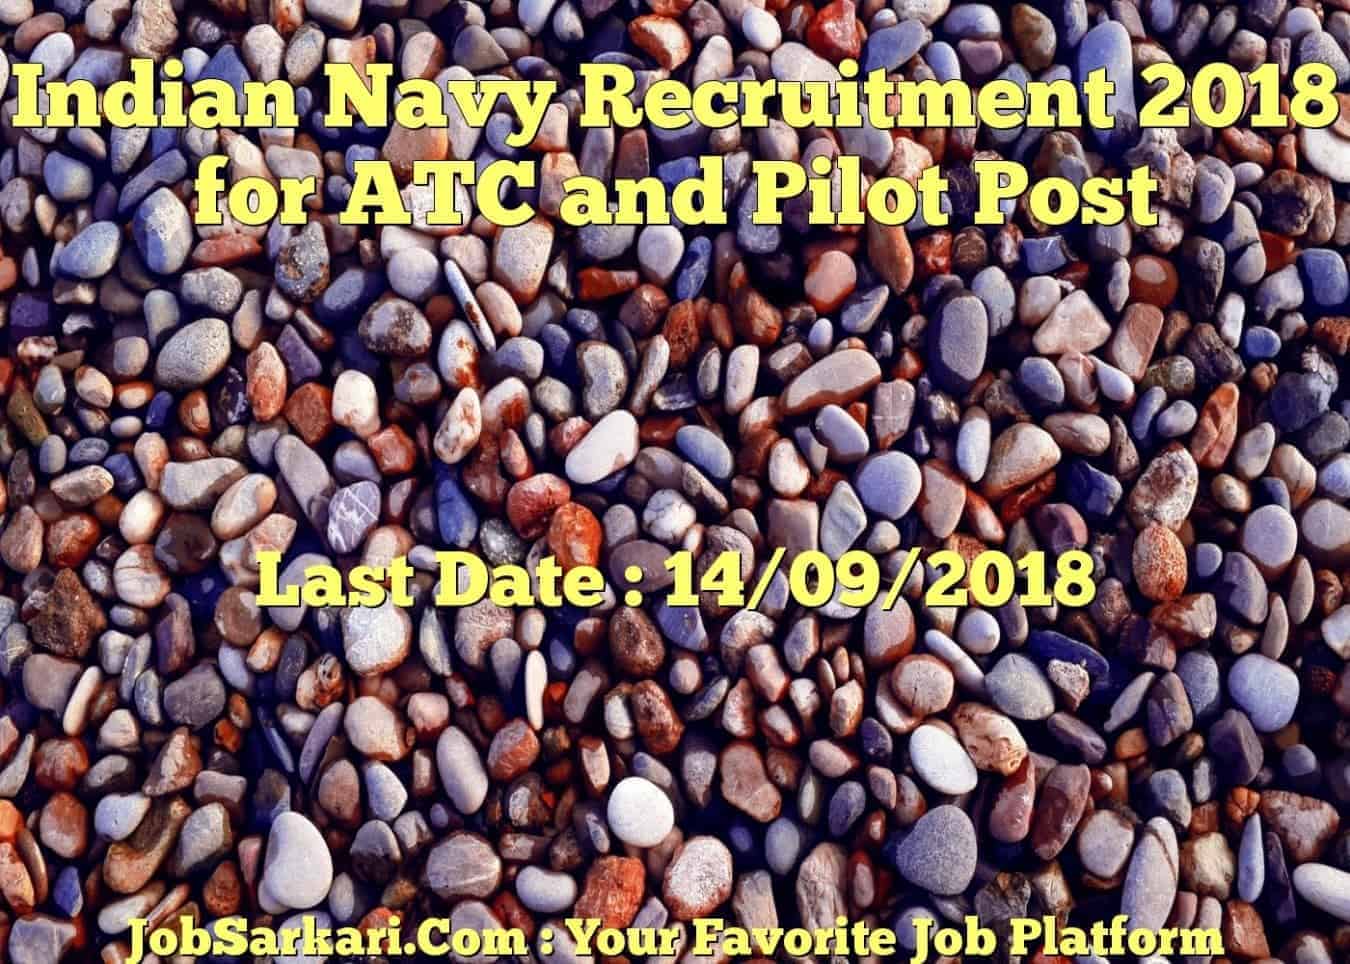 Indian Navy Recruitment 2018 for ATC and Pilot Post